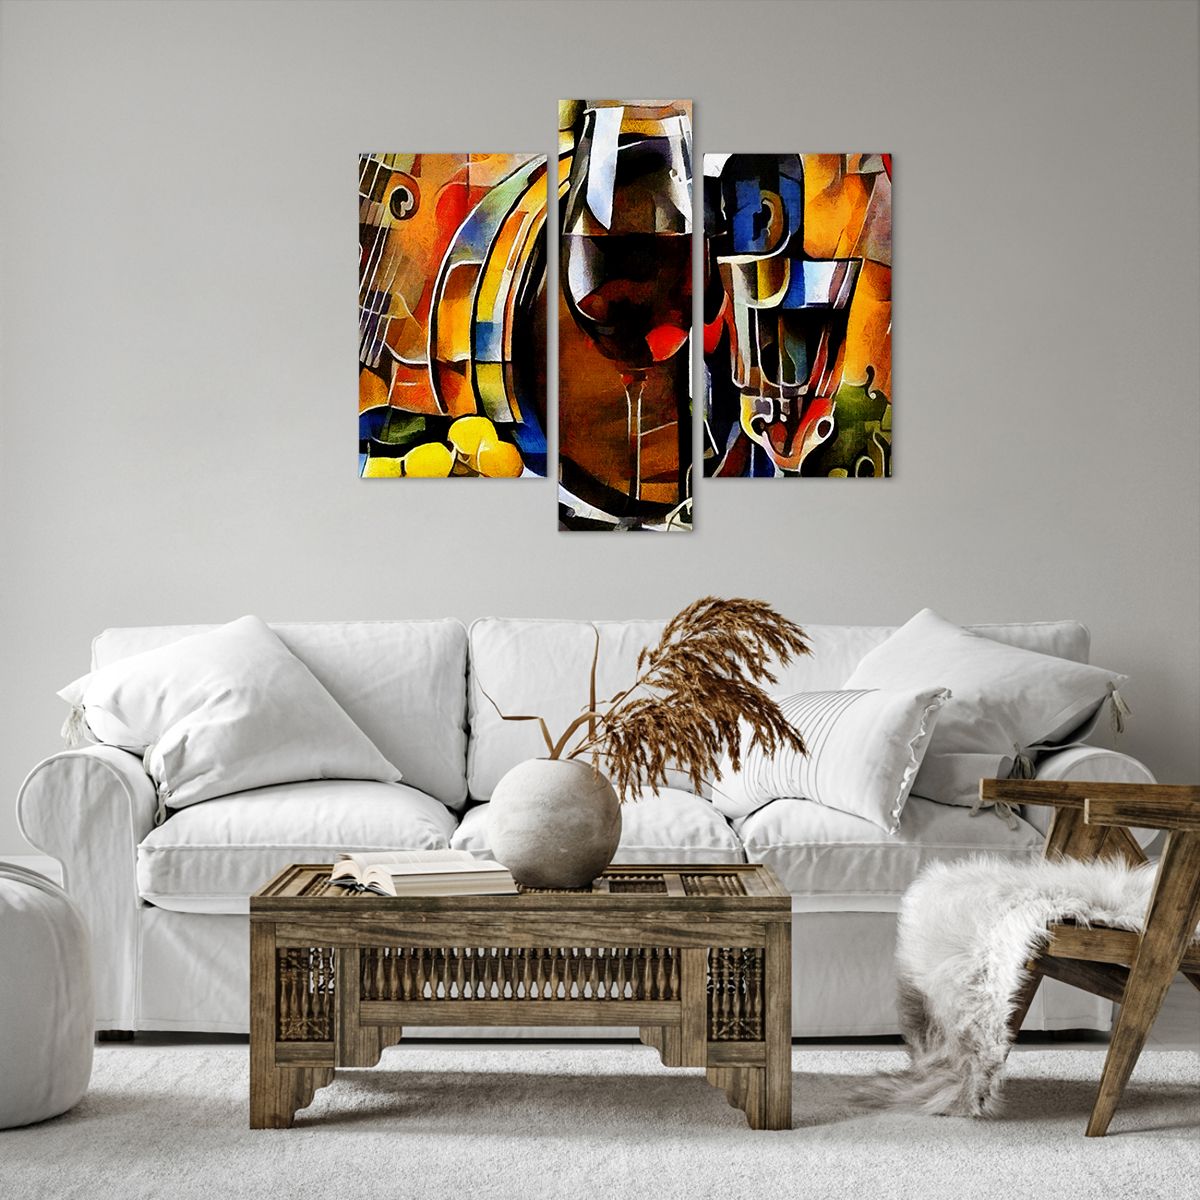 Impression sur toile Abstraction, Impression sur toile Cubisme, Impression sur toile Art, Impression sur toile Vin, Impression sur toile Violon